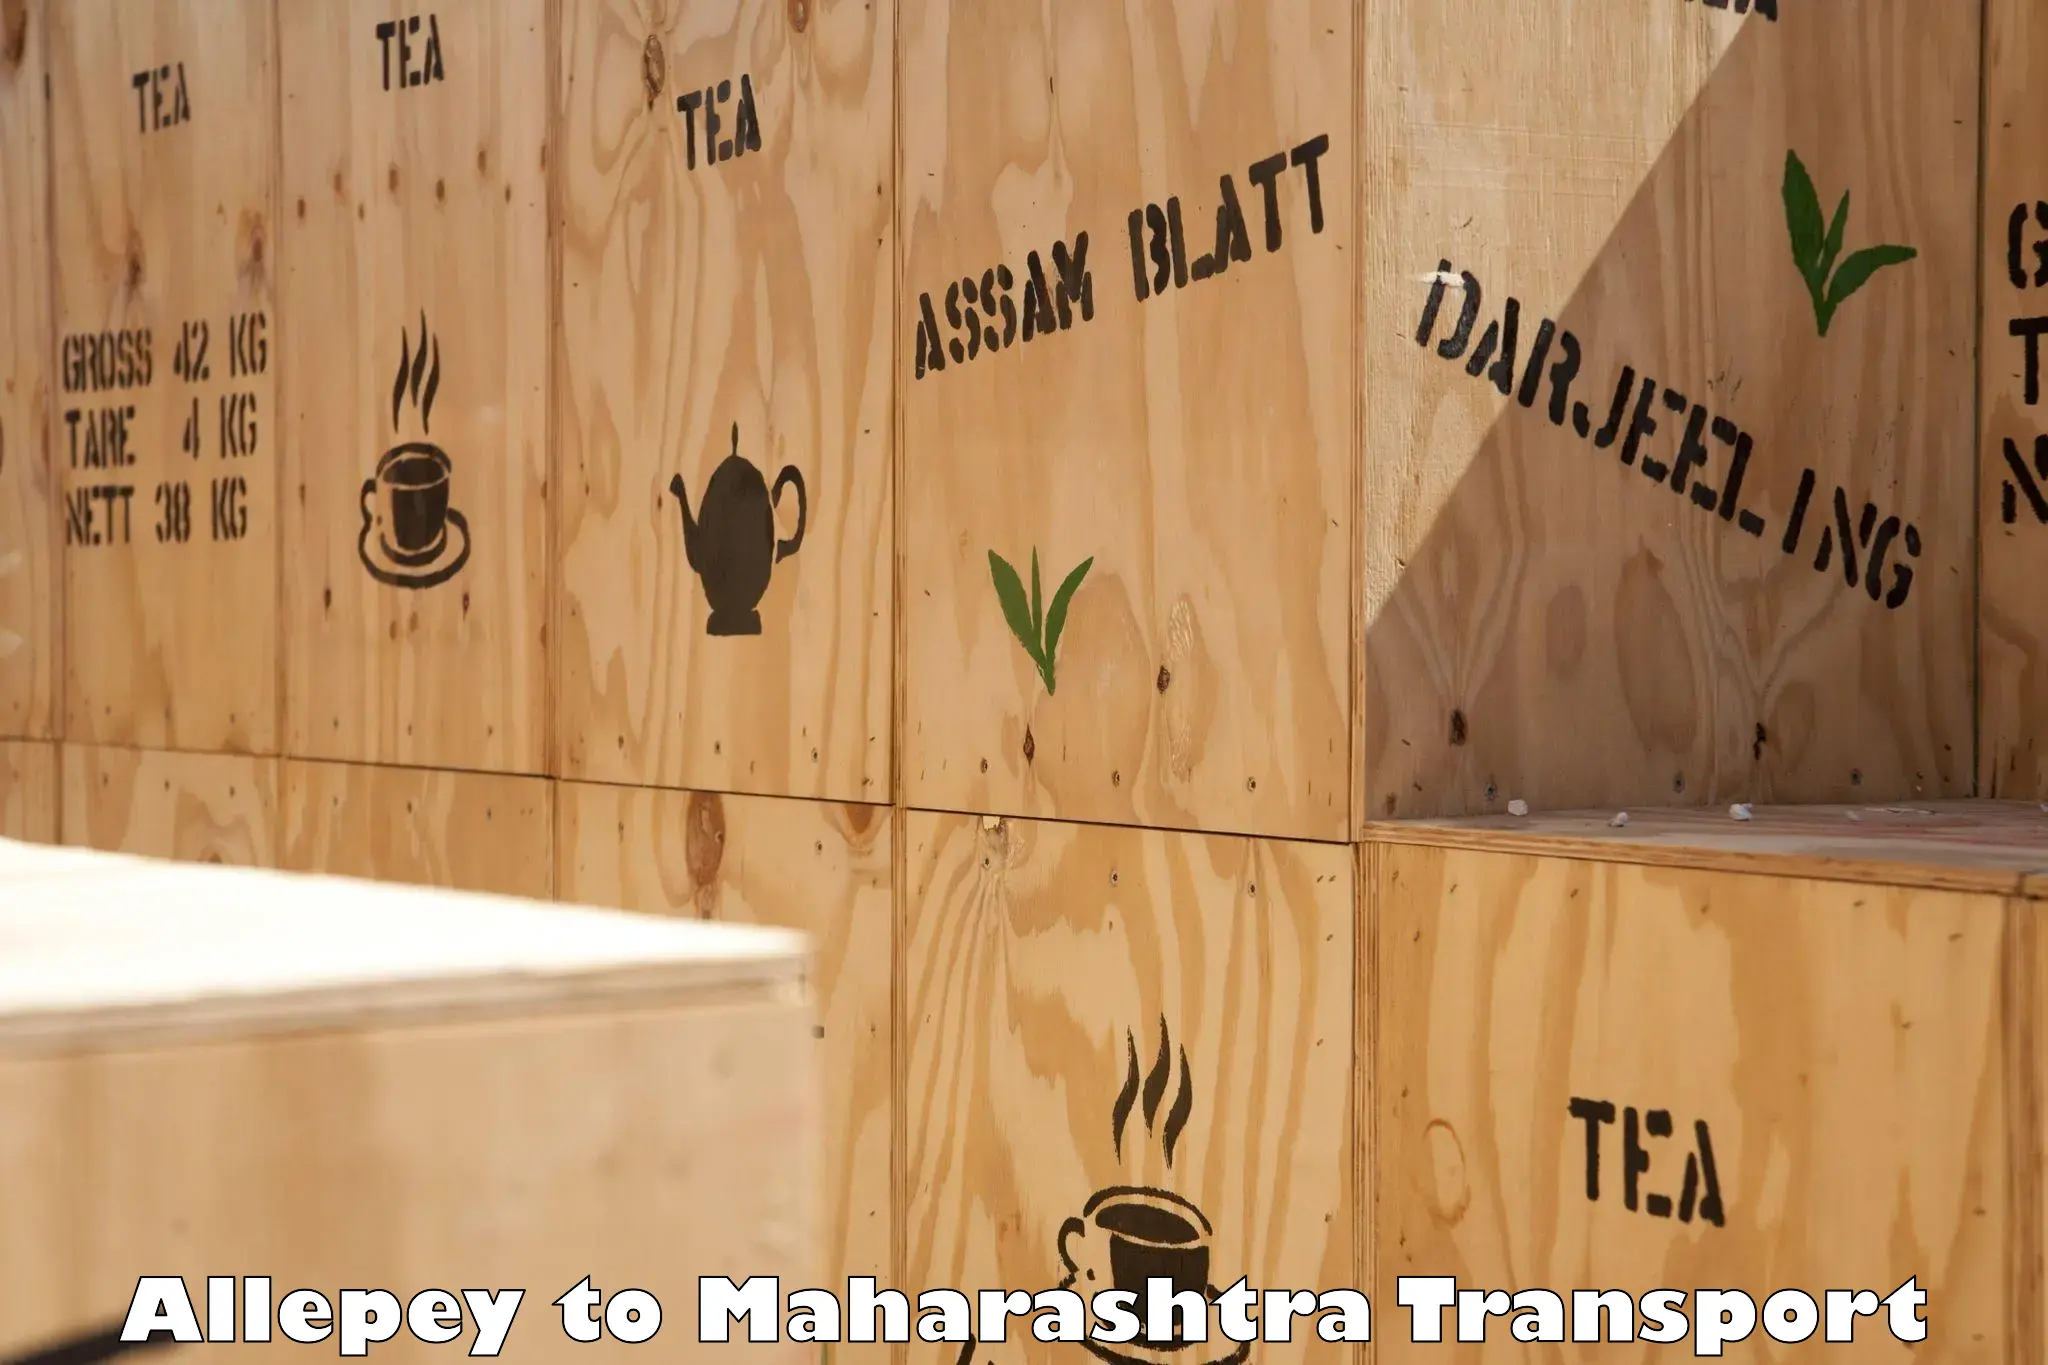 Truck transport companies in India Allepey to Ulhasnagar